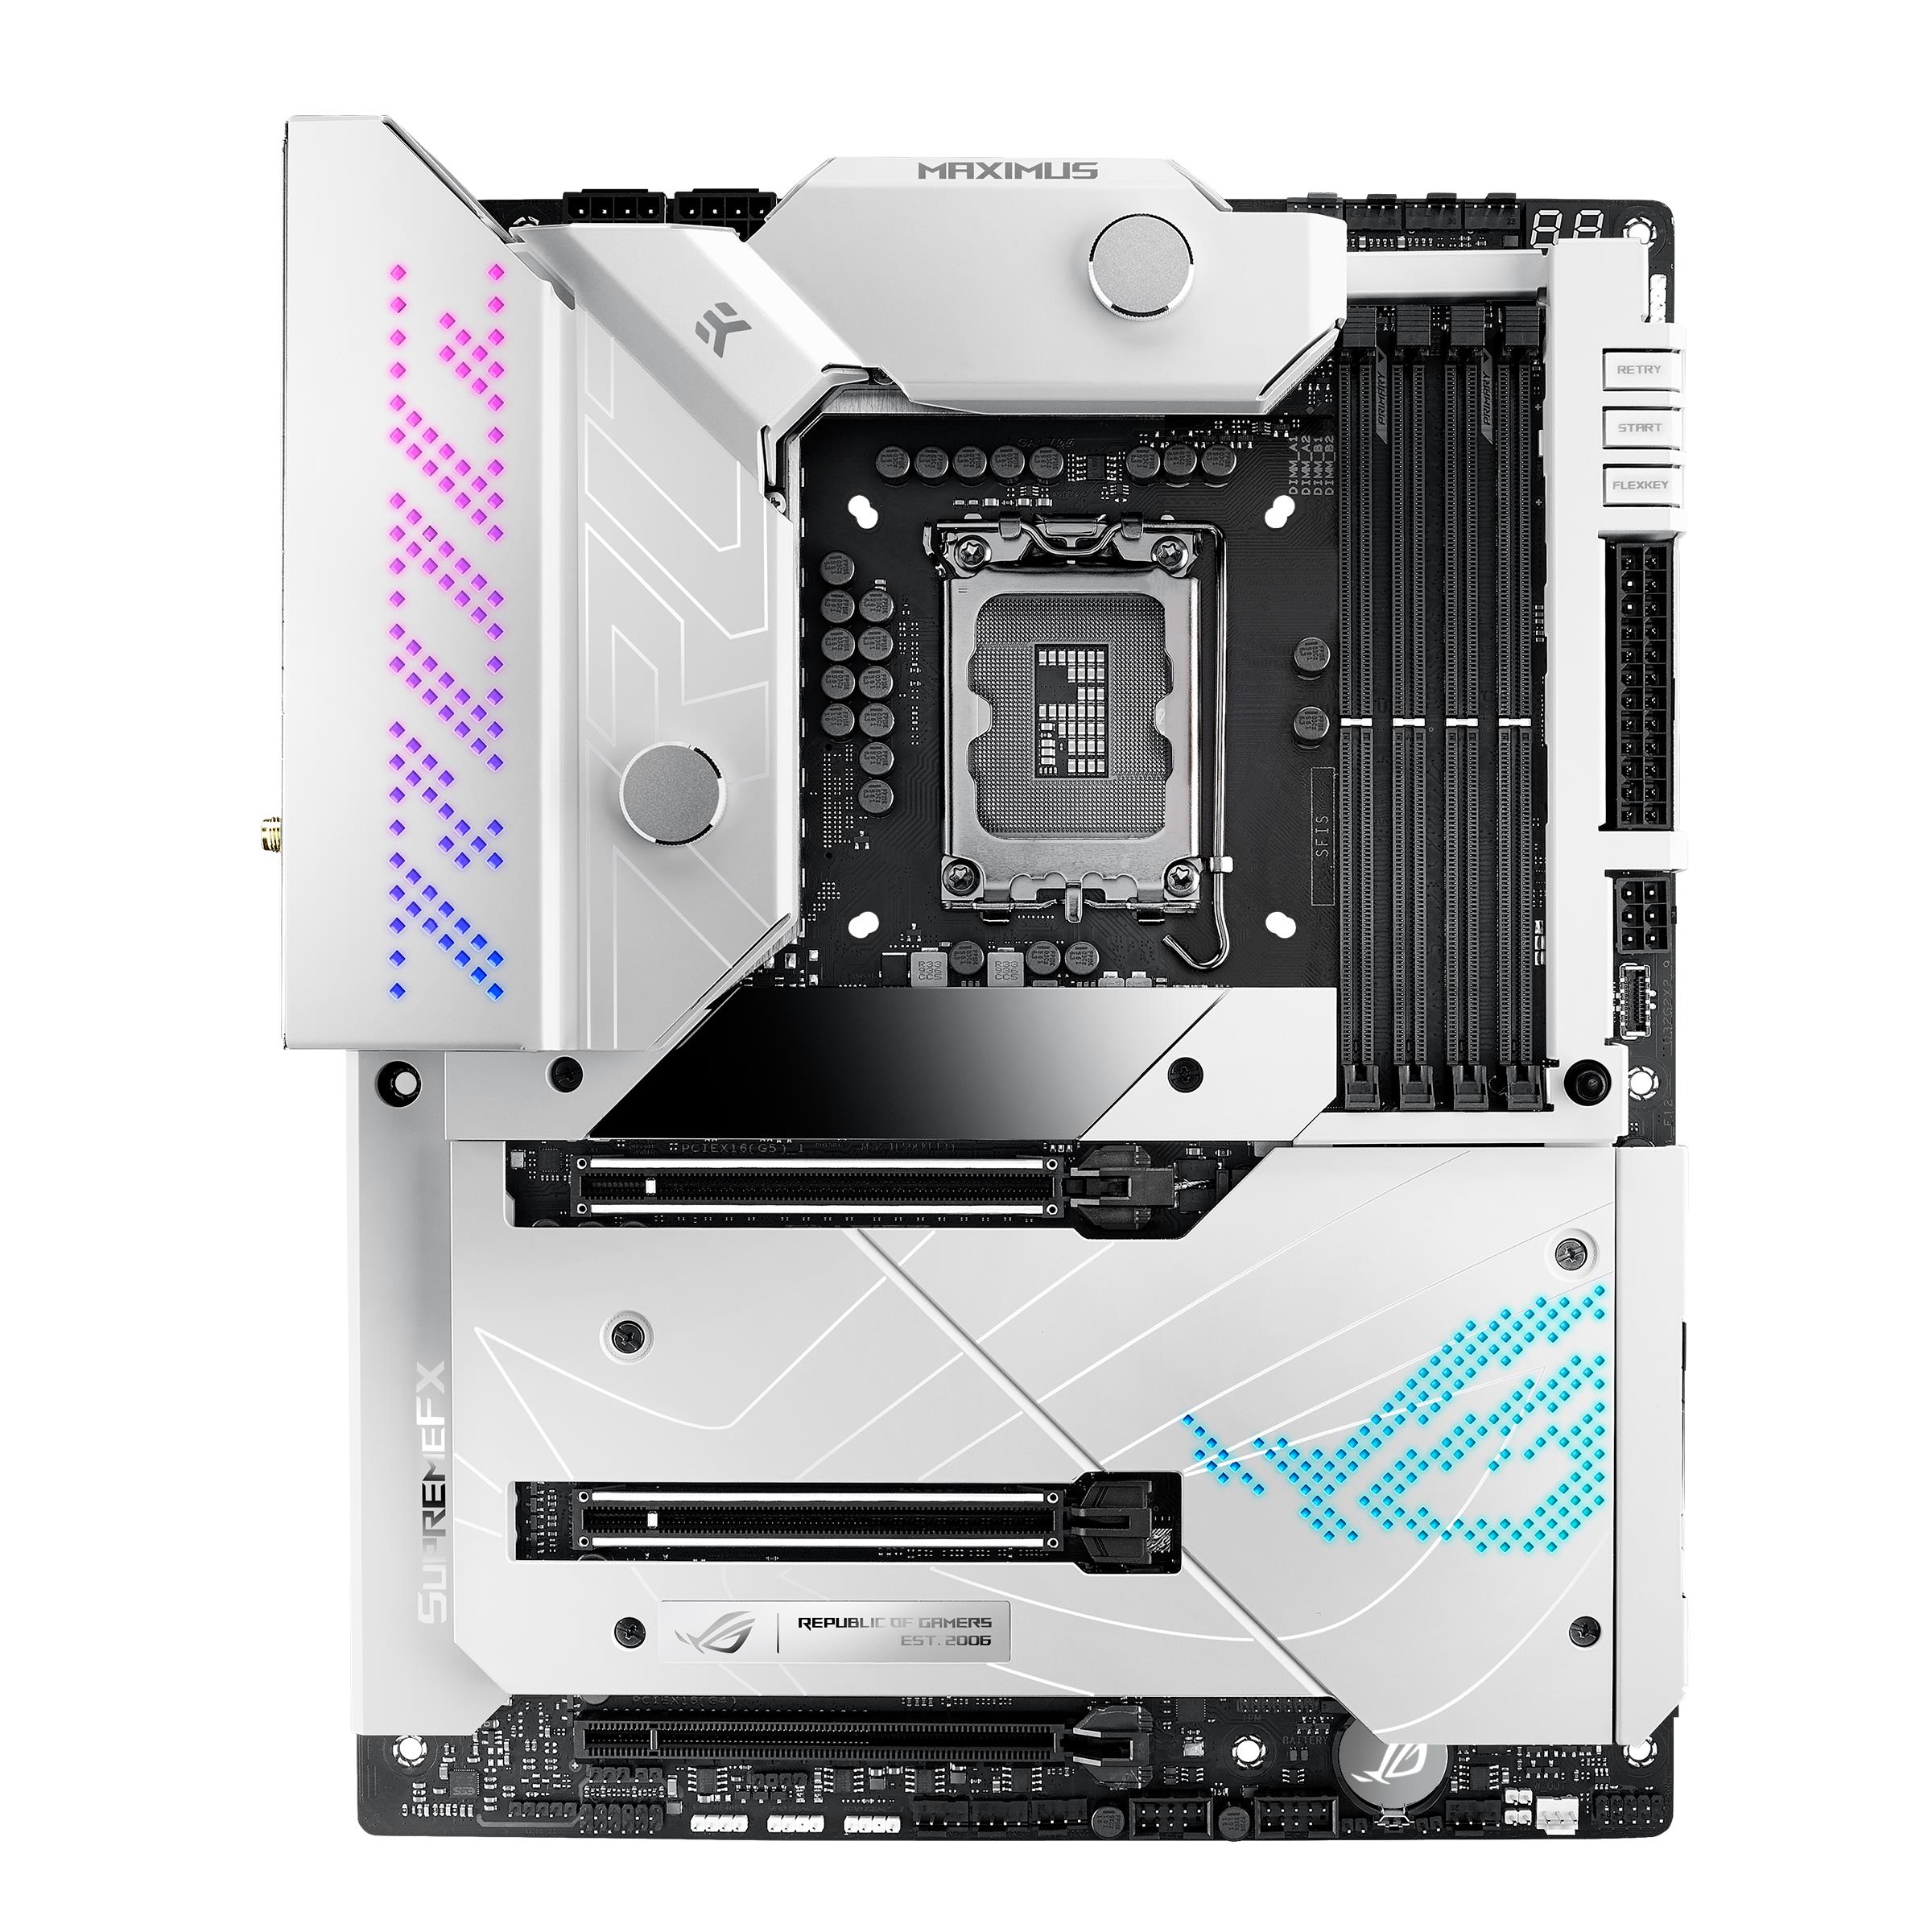 A large marketing image providing additional information about the product ASUS ROG Maximus Z690 Formula LGA1700 ATX Desktop Motherboard - Additional alt info not provided